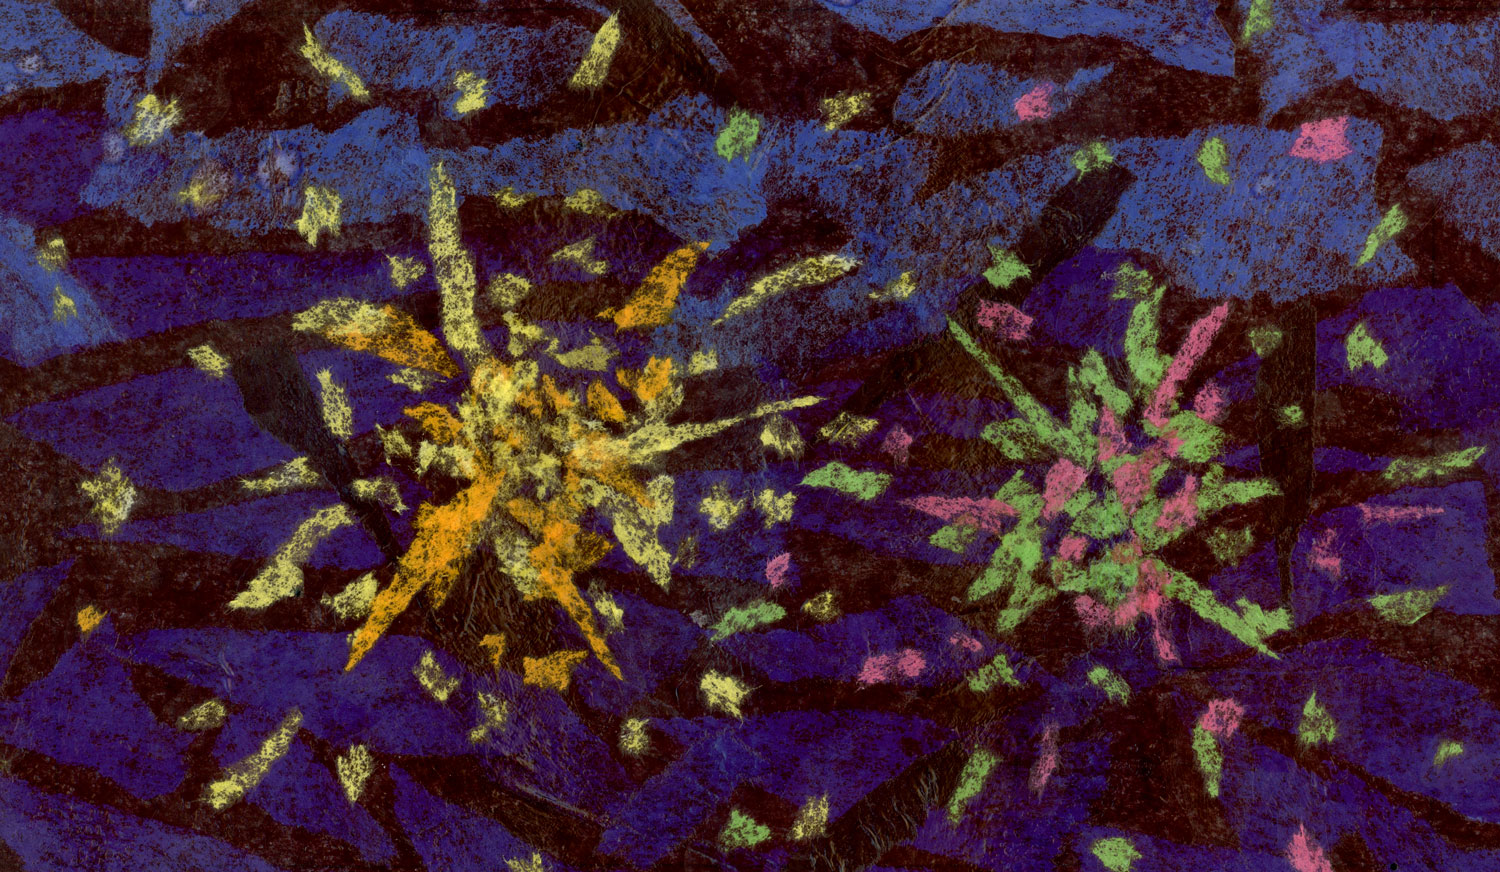 An abstract illustration of fireworks created from different colored pieces of tissue paper. The sky in the background is black with deep shades of blue and the fireworks are yellow, orange, green, and pink.